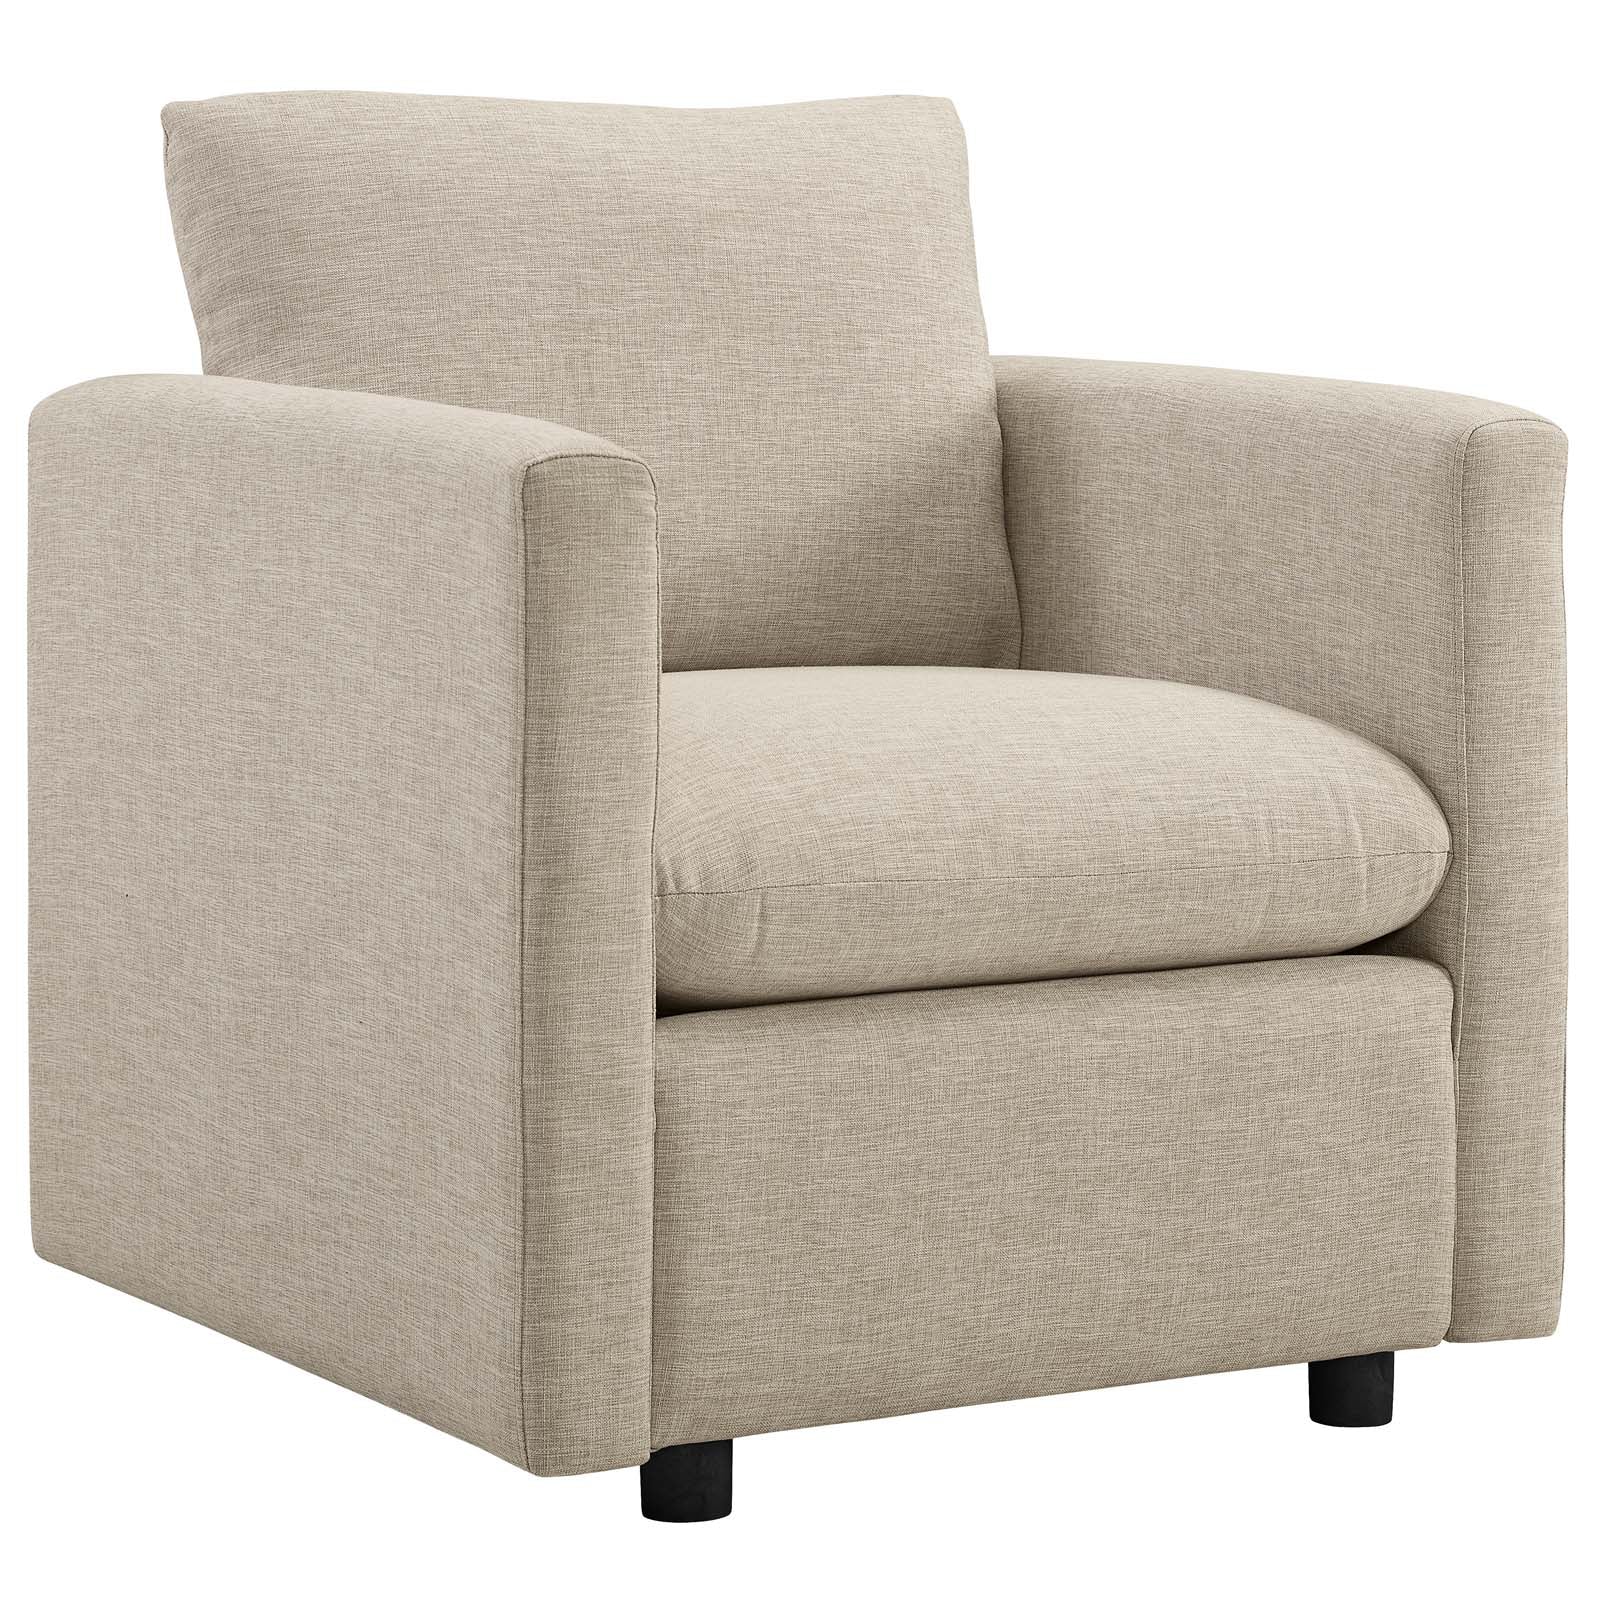 Modway Chairs - Activate Upholstered Fabric Armchair Beige ( Set of 2 )